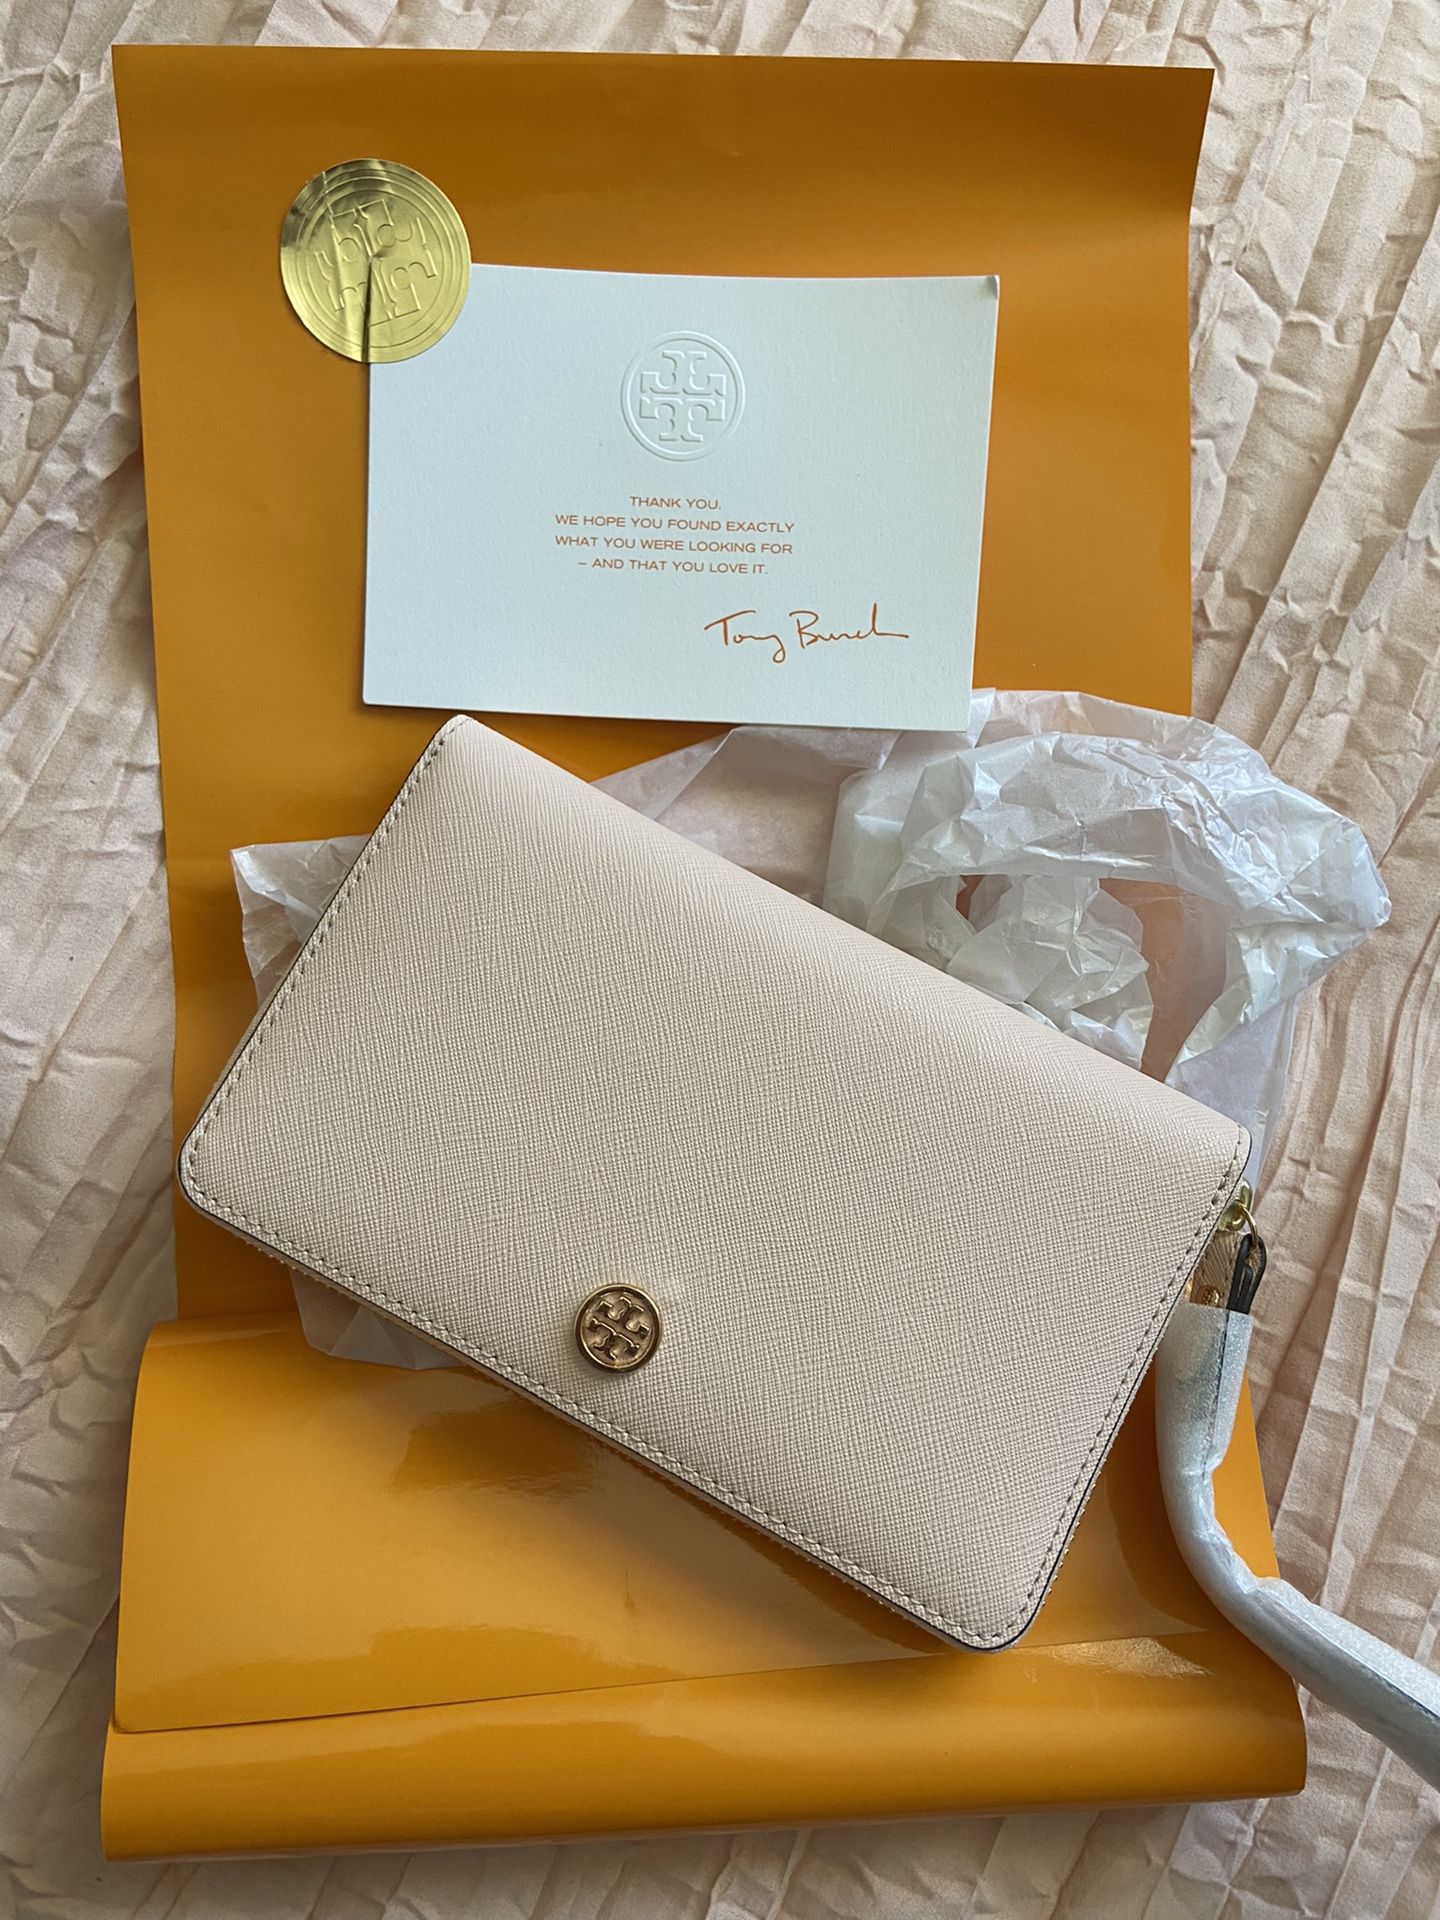 Tory Burch Wristlet Smart Phone Wallet for Sale in Chino, CA - OfferUp